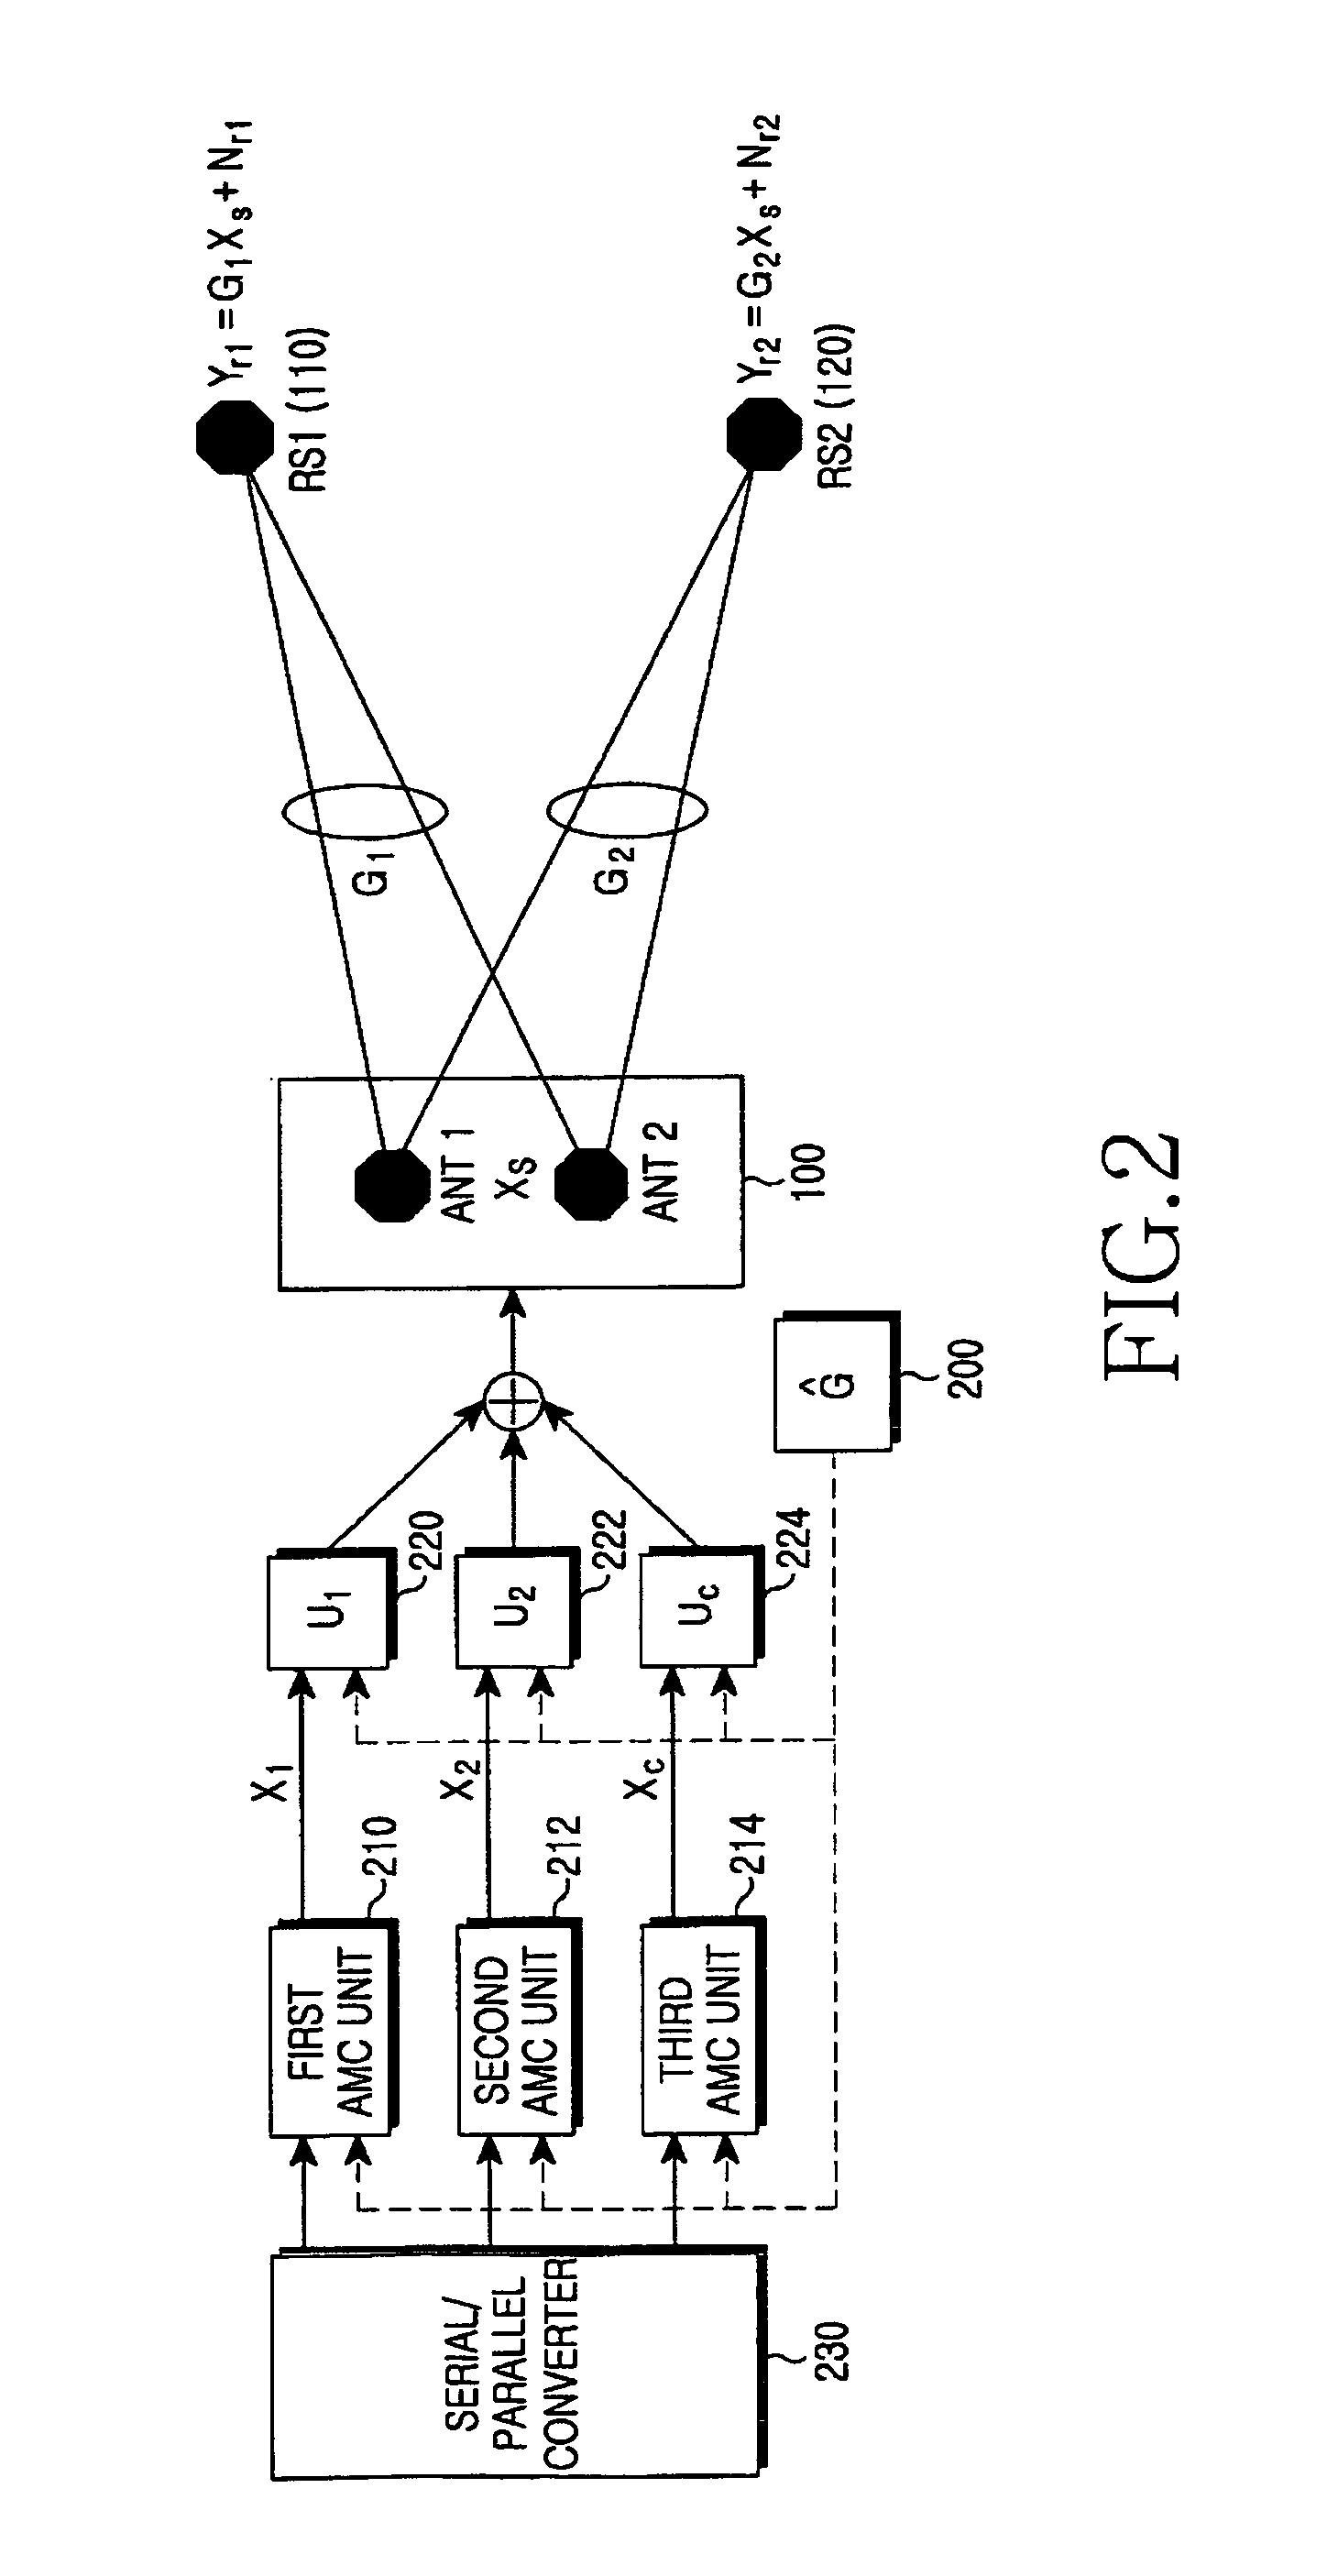 Apparatus and method for cooperative relay in a wireless communication system based on relay stations